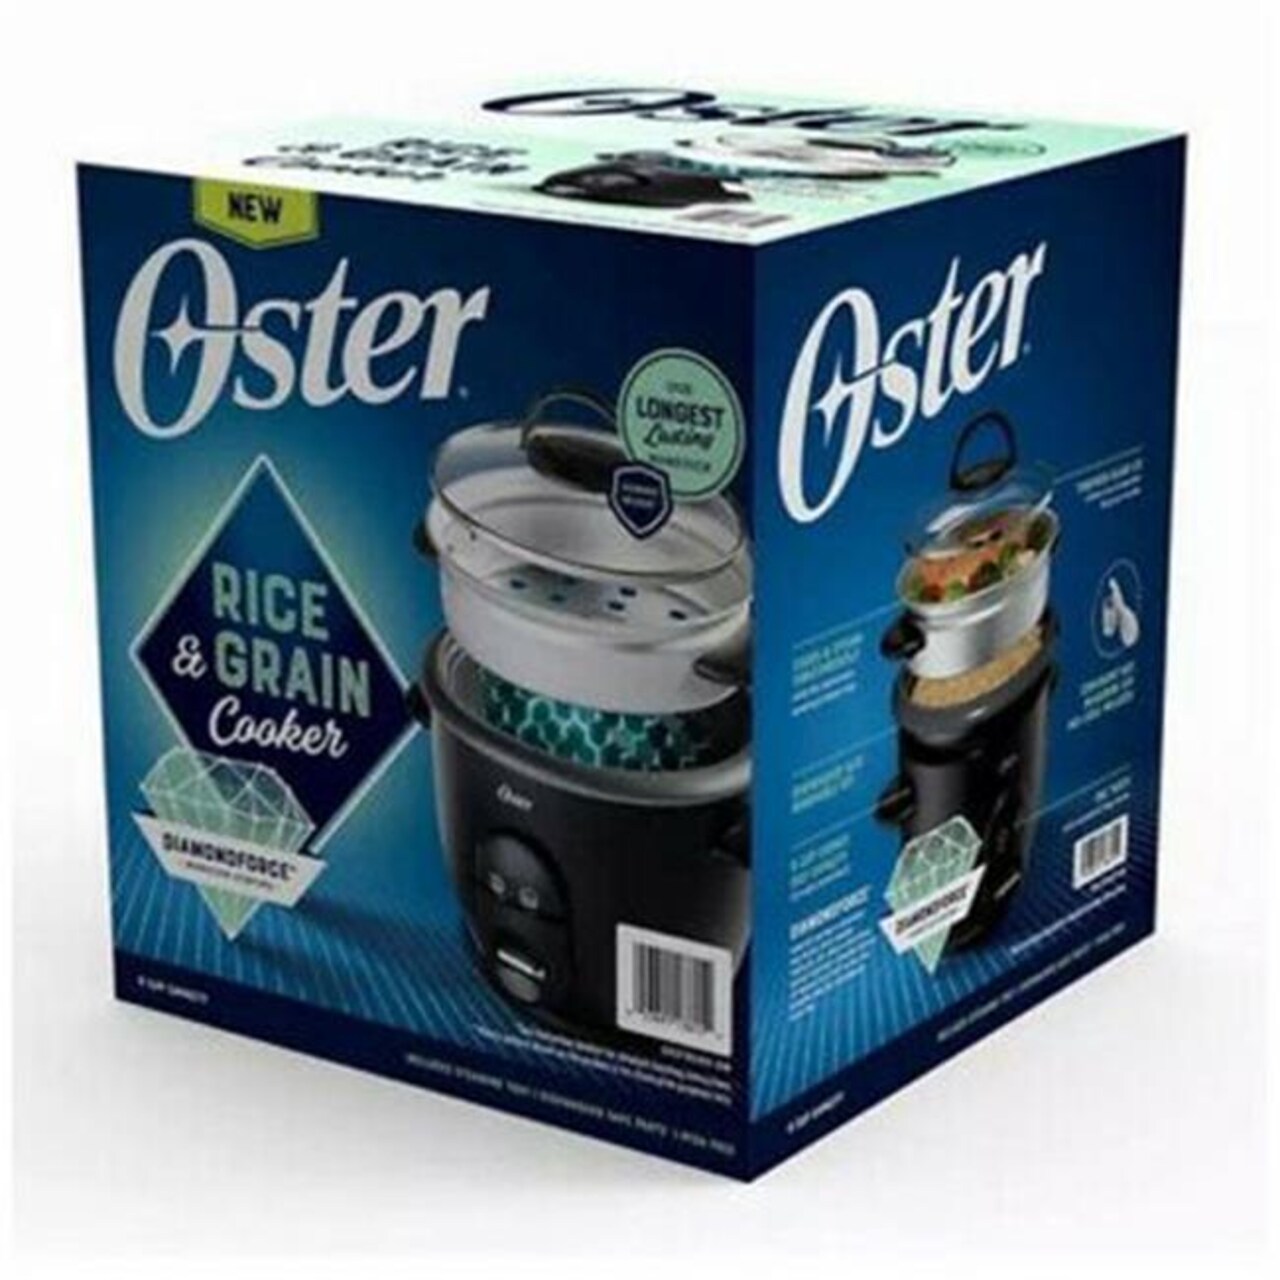 Oster 004722-000-000 Oster Rice Cooker - 6 Cup